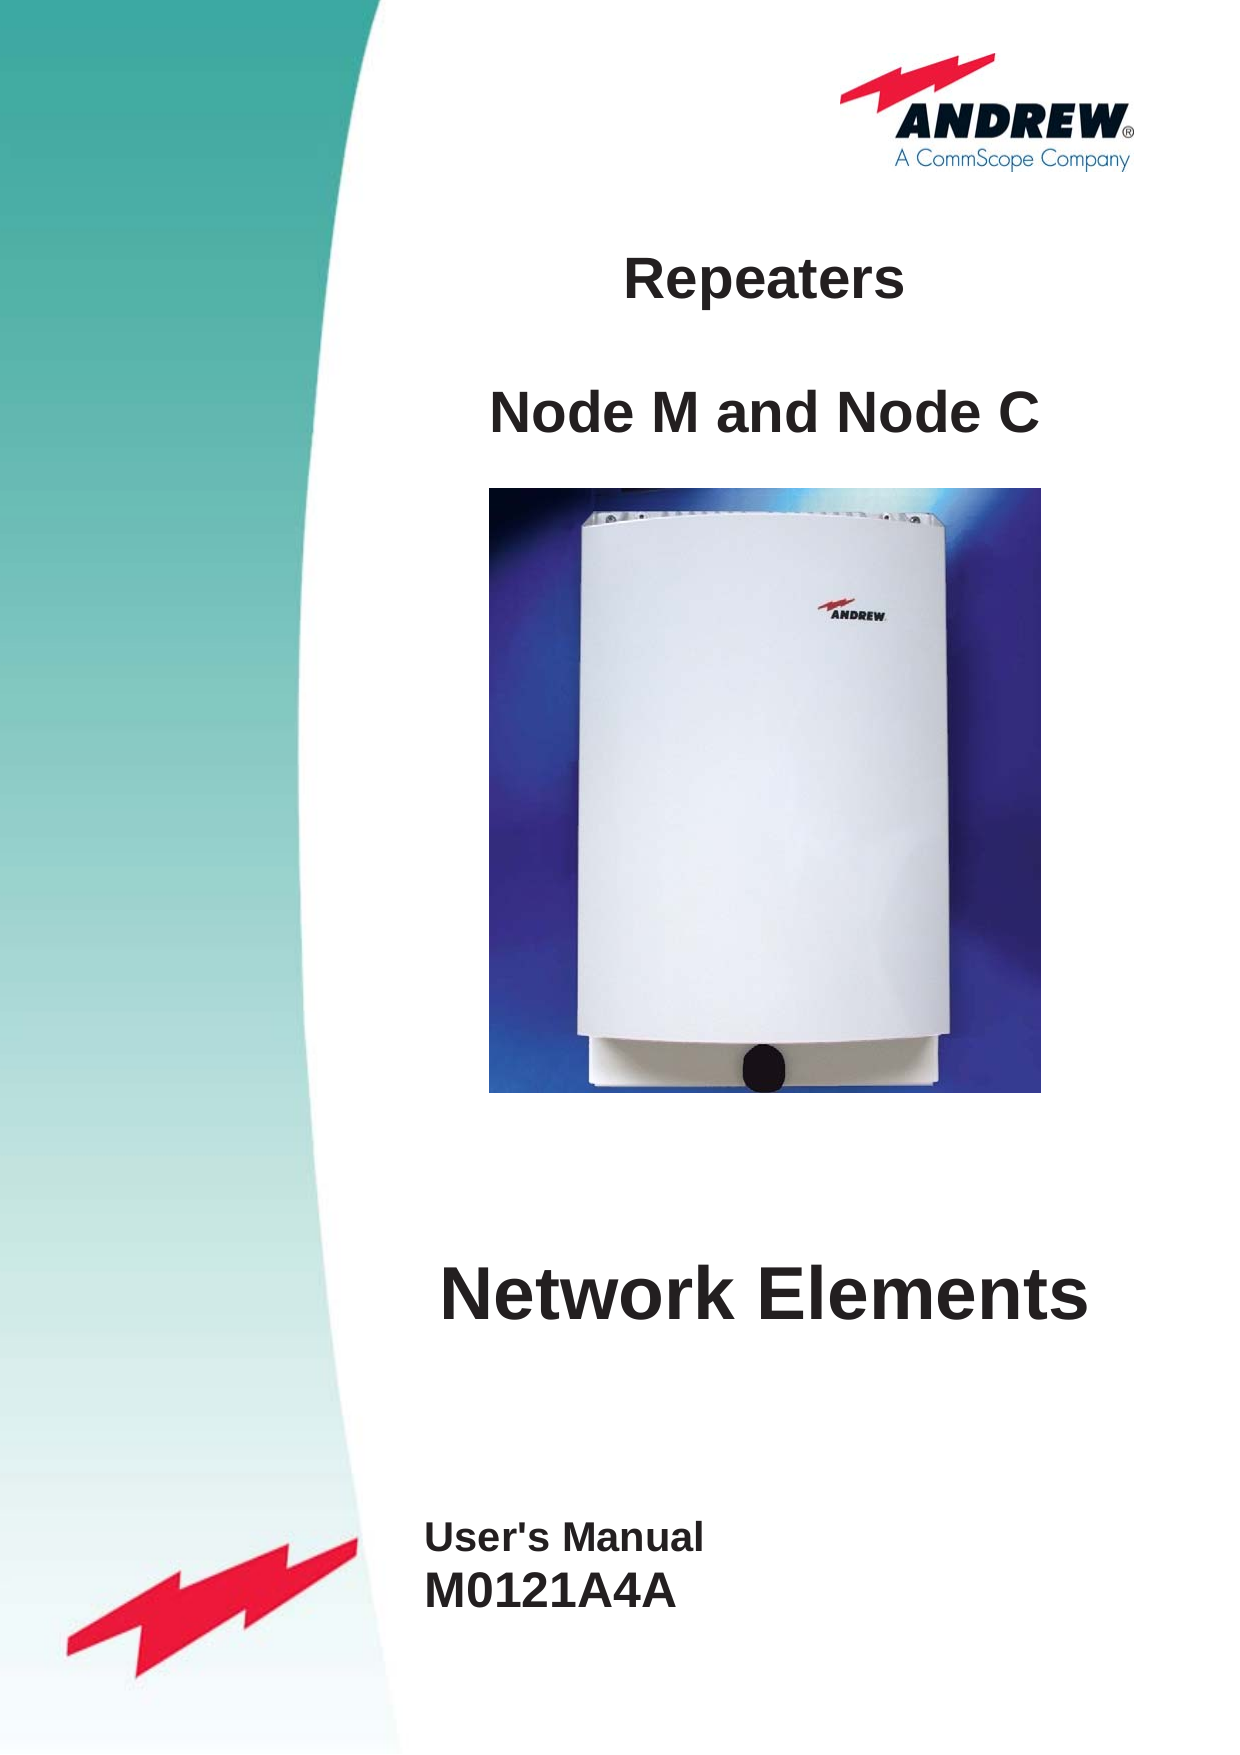  Repeaters  Node M and Node C   Network ElementsUser&apos;s Manual M0121A4A